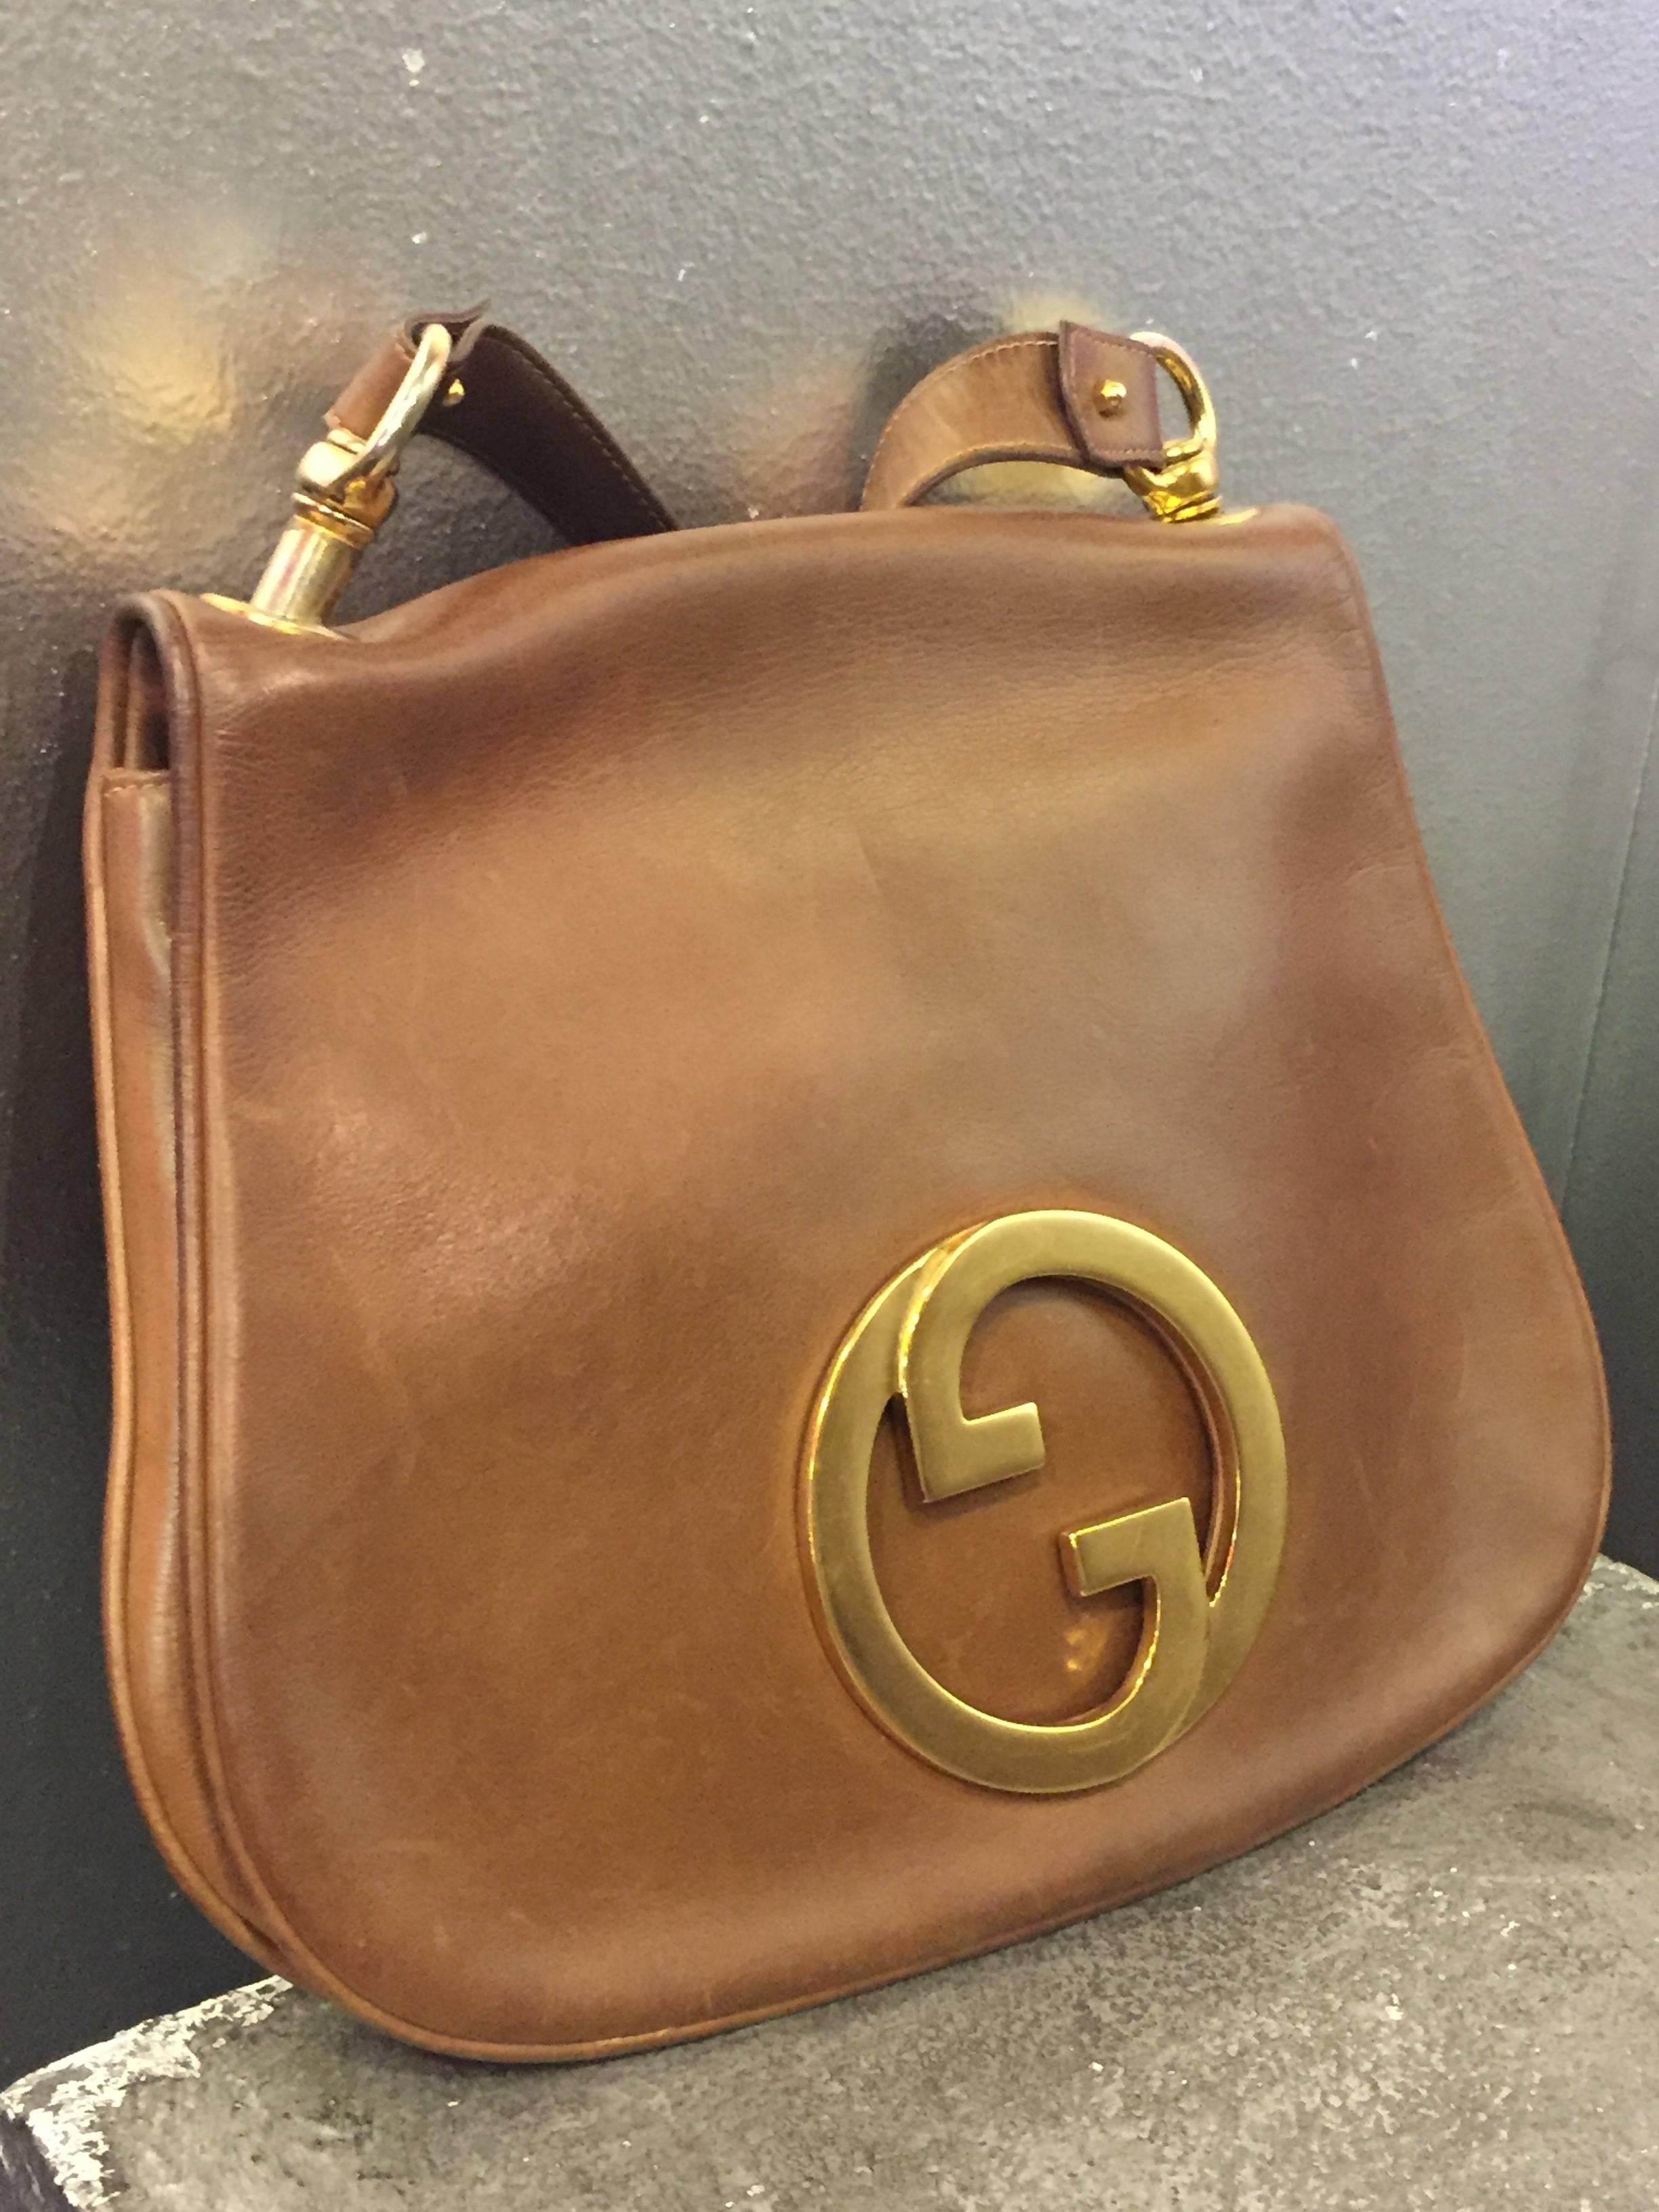 This is absolutely the quintessential 70's whisky brown leather Gucci shoulder bag that completes every boho look. Very timely with the resurgence of the Gucci logo purse. 

Bag measures 11 inches at it widest point and is 11 inches tall, with an